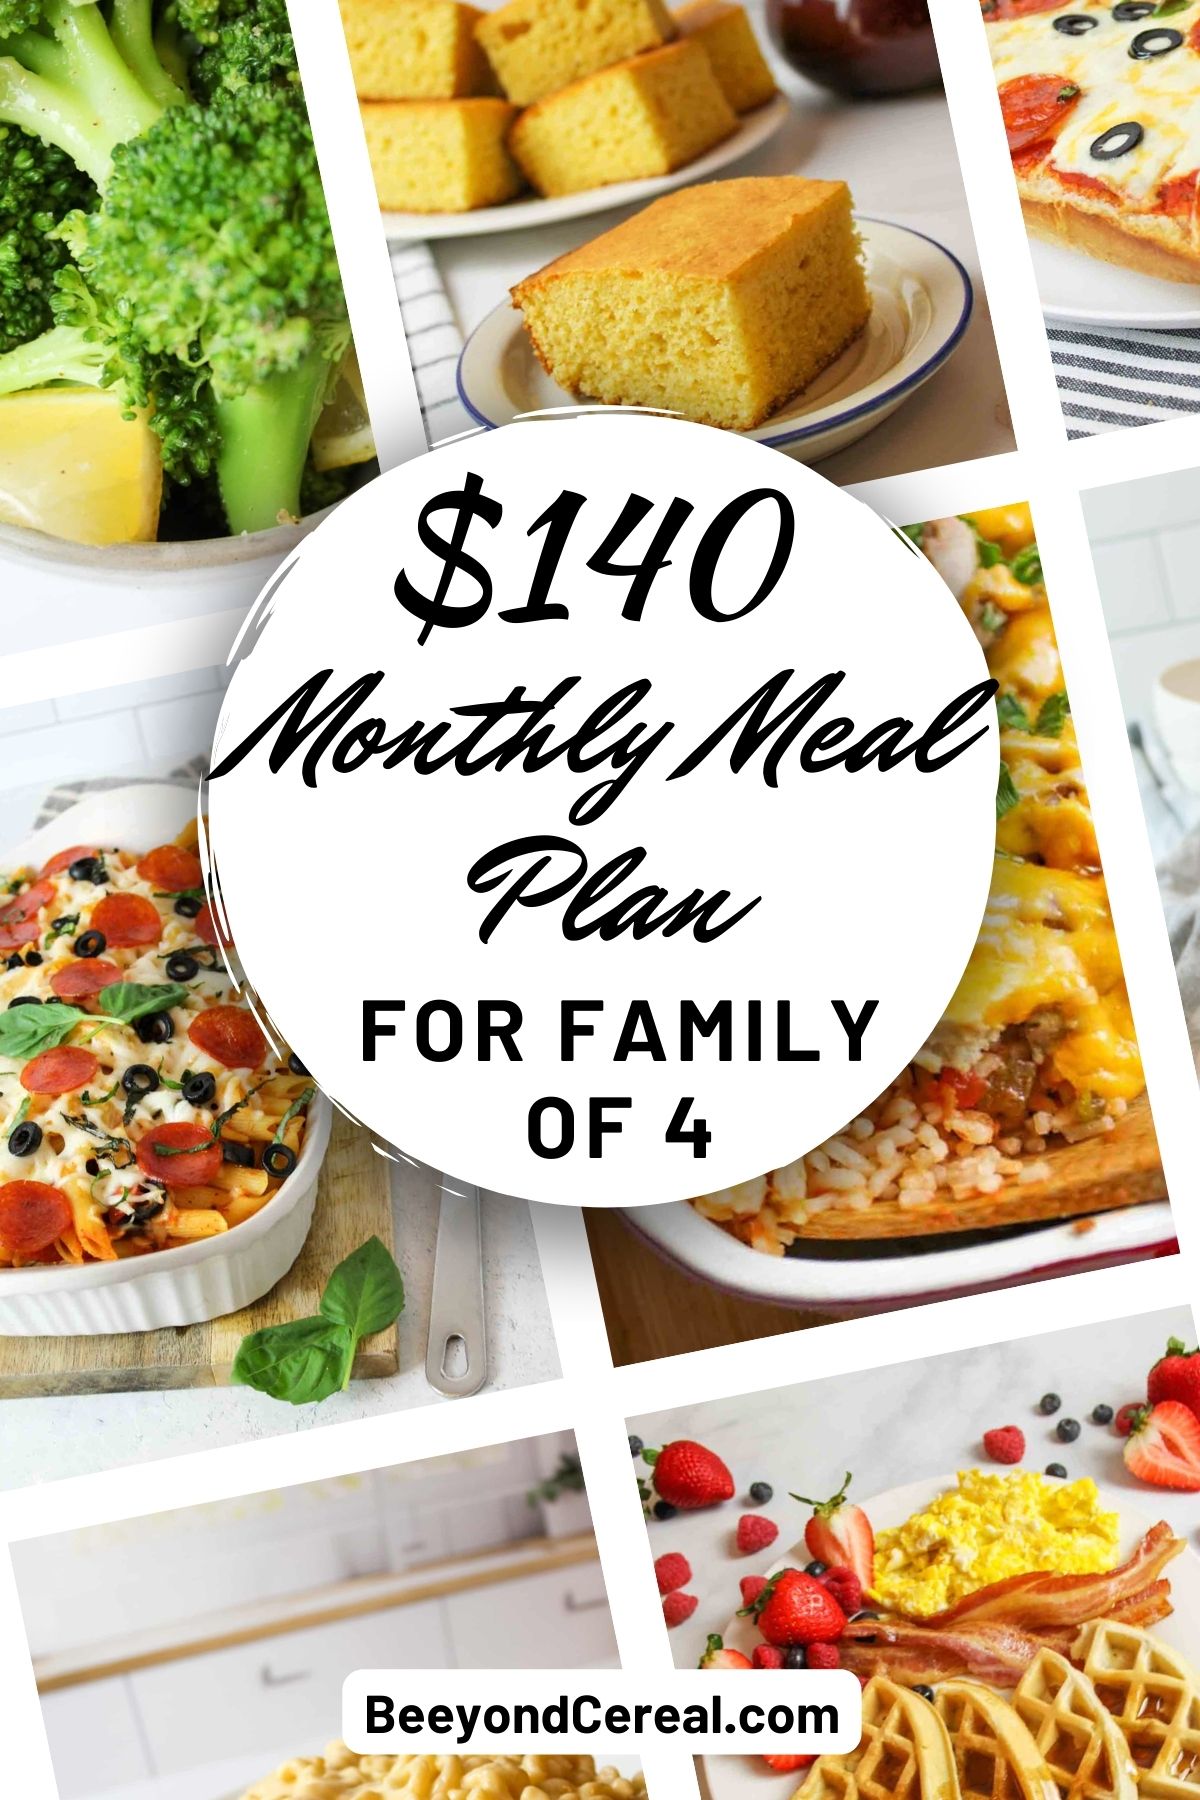 $140 monthly meal plan for a family of 4